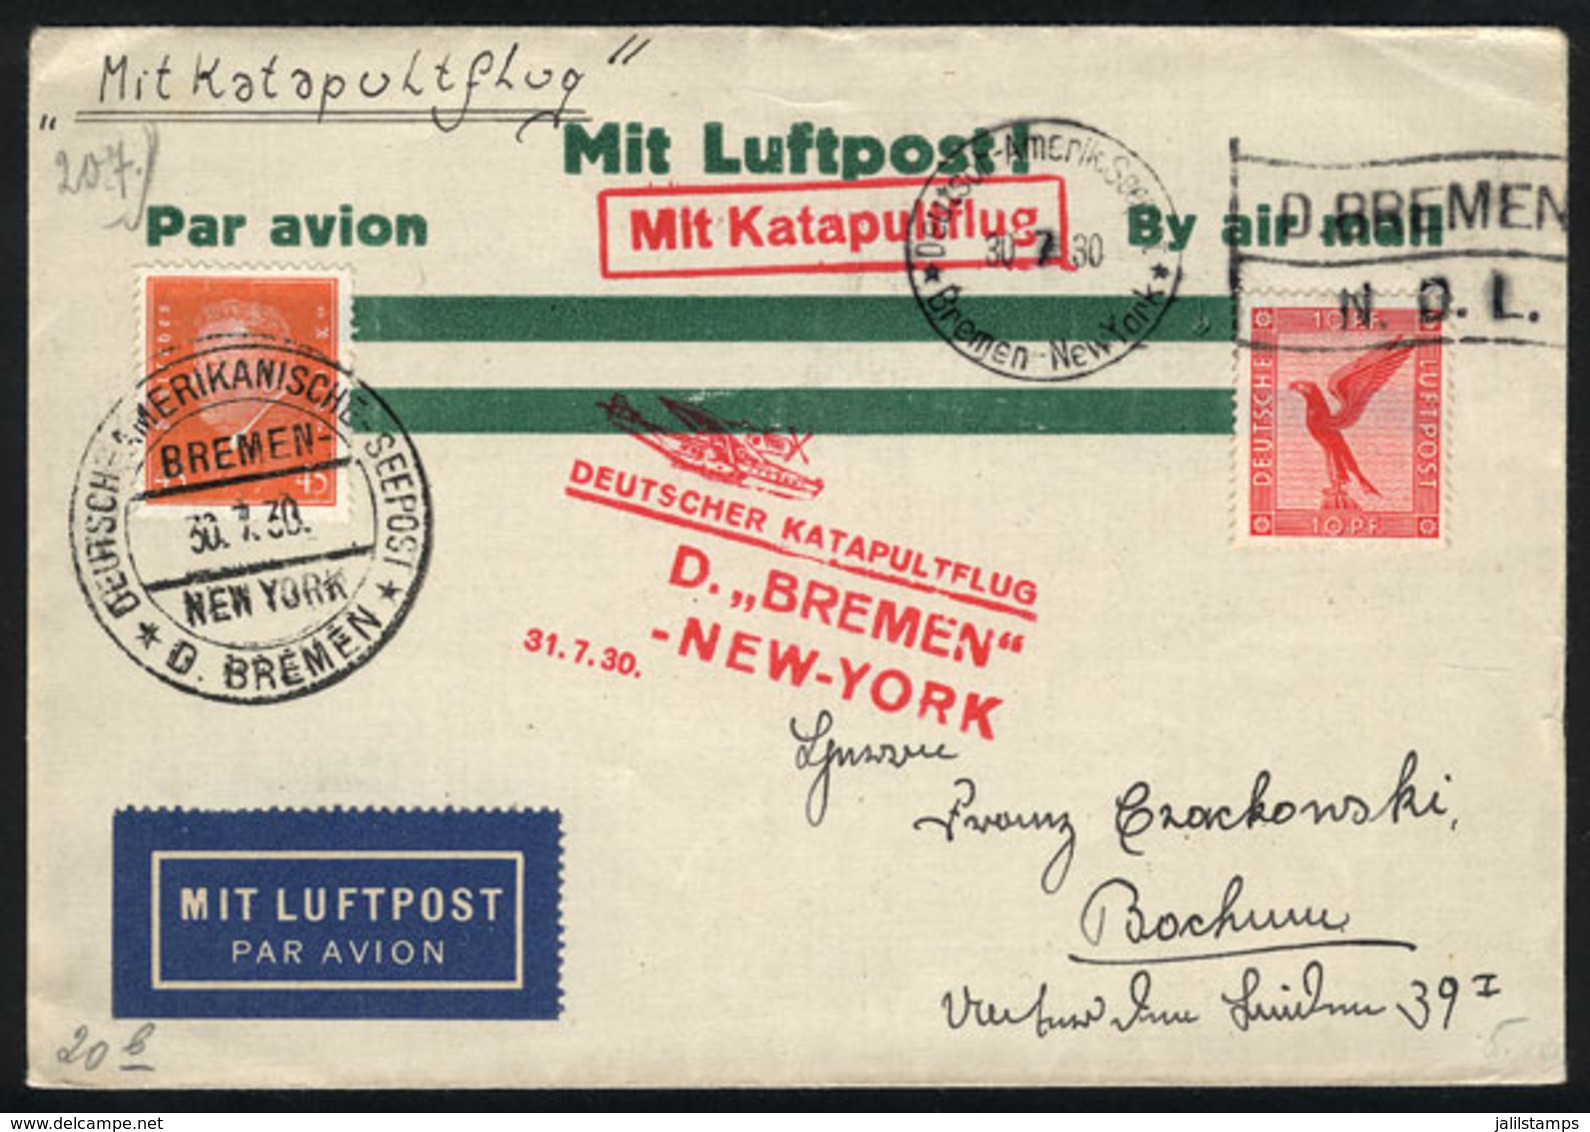 39 GERMANY: 30/JUL/1930 High Seas - New York, Cover Carried On Catapult Flight Via Ship Bremen, With Special Marks And P - Other & Unclassified